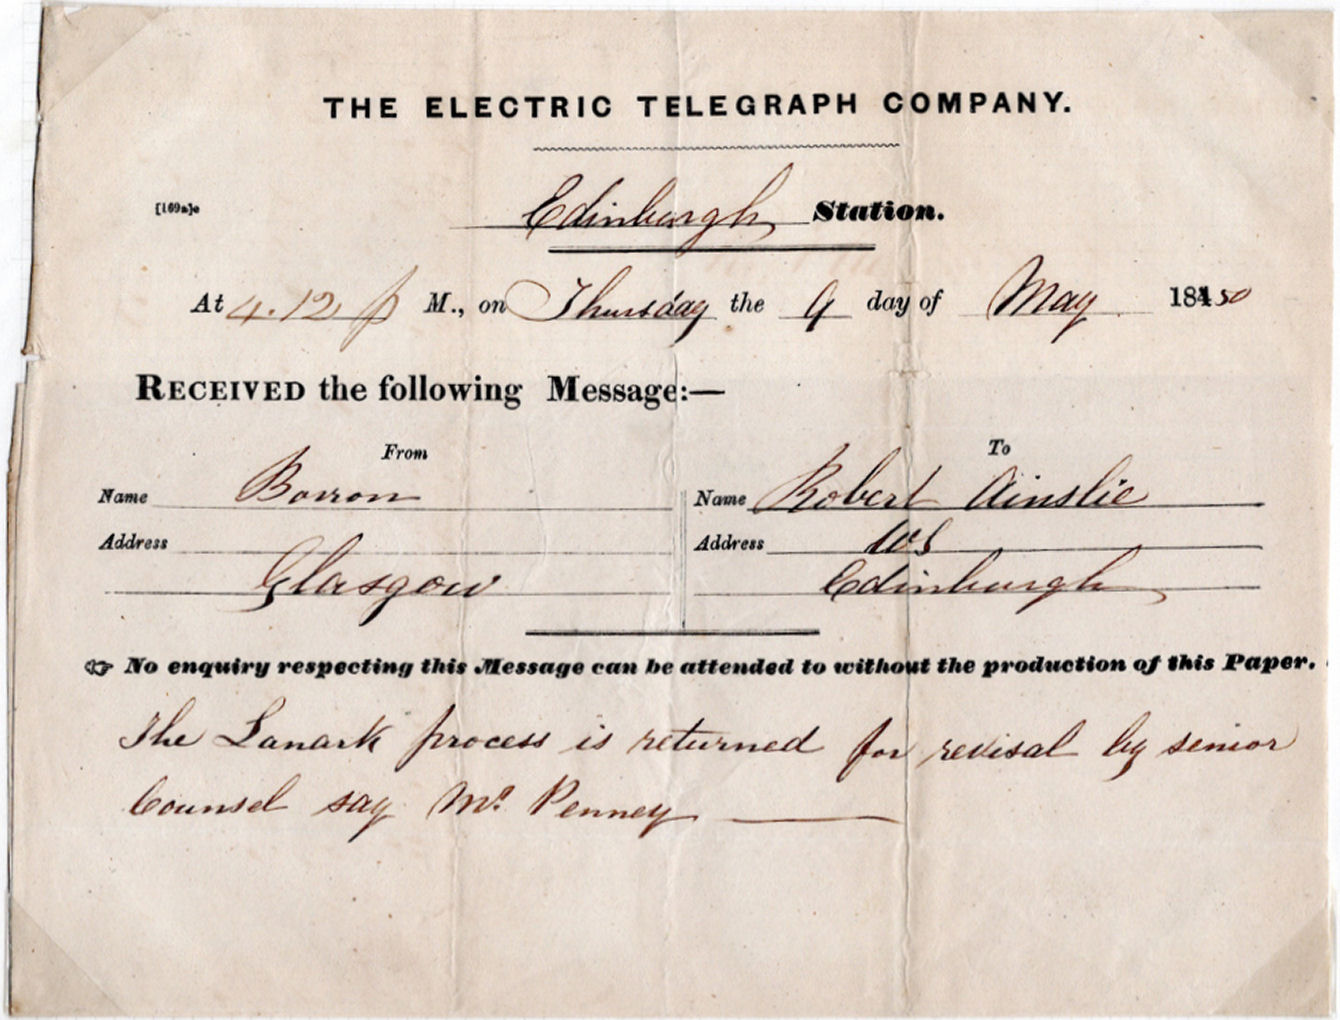 Electric Telegraph Co Form 169a.